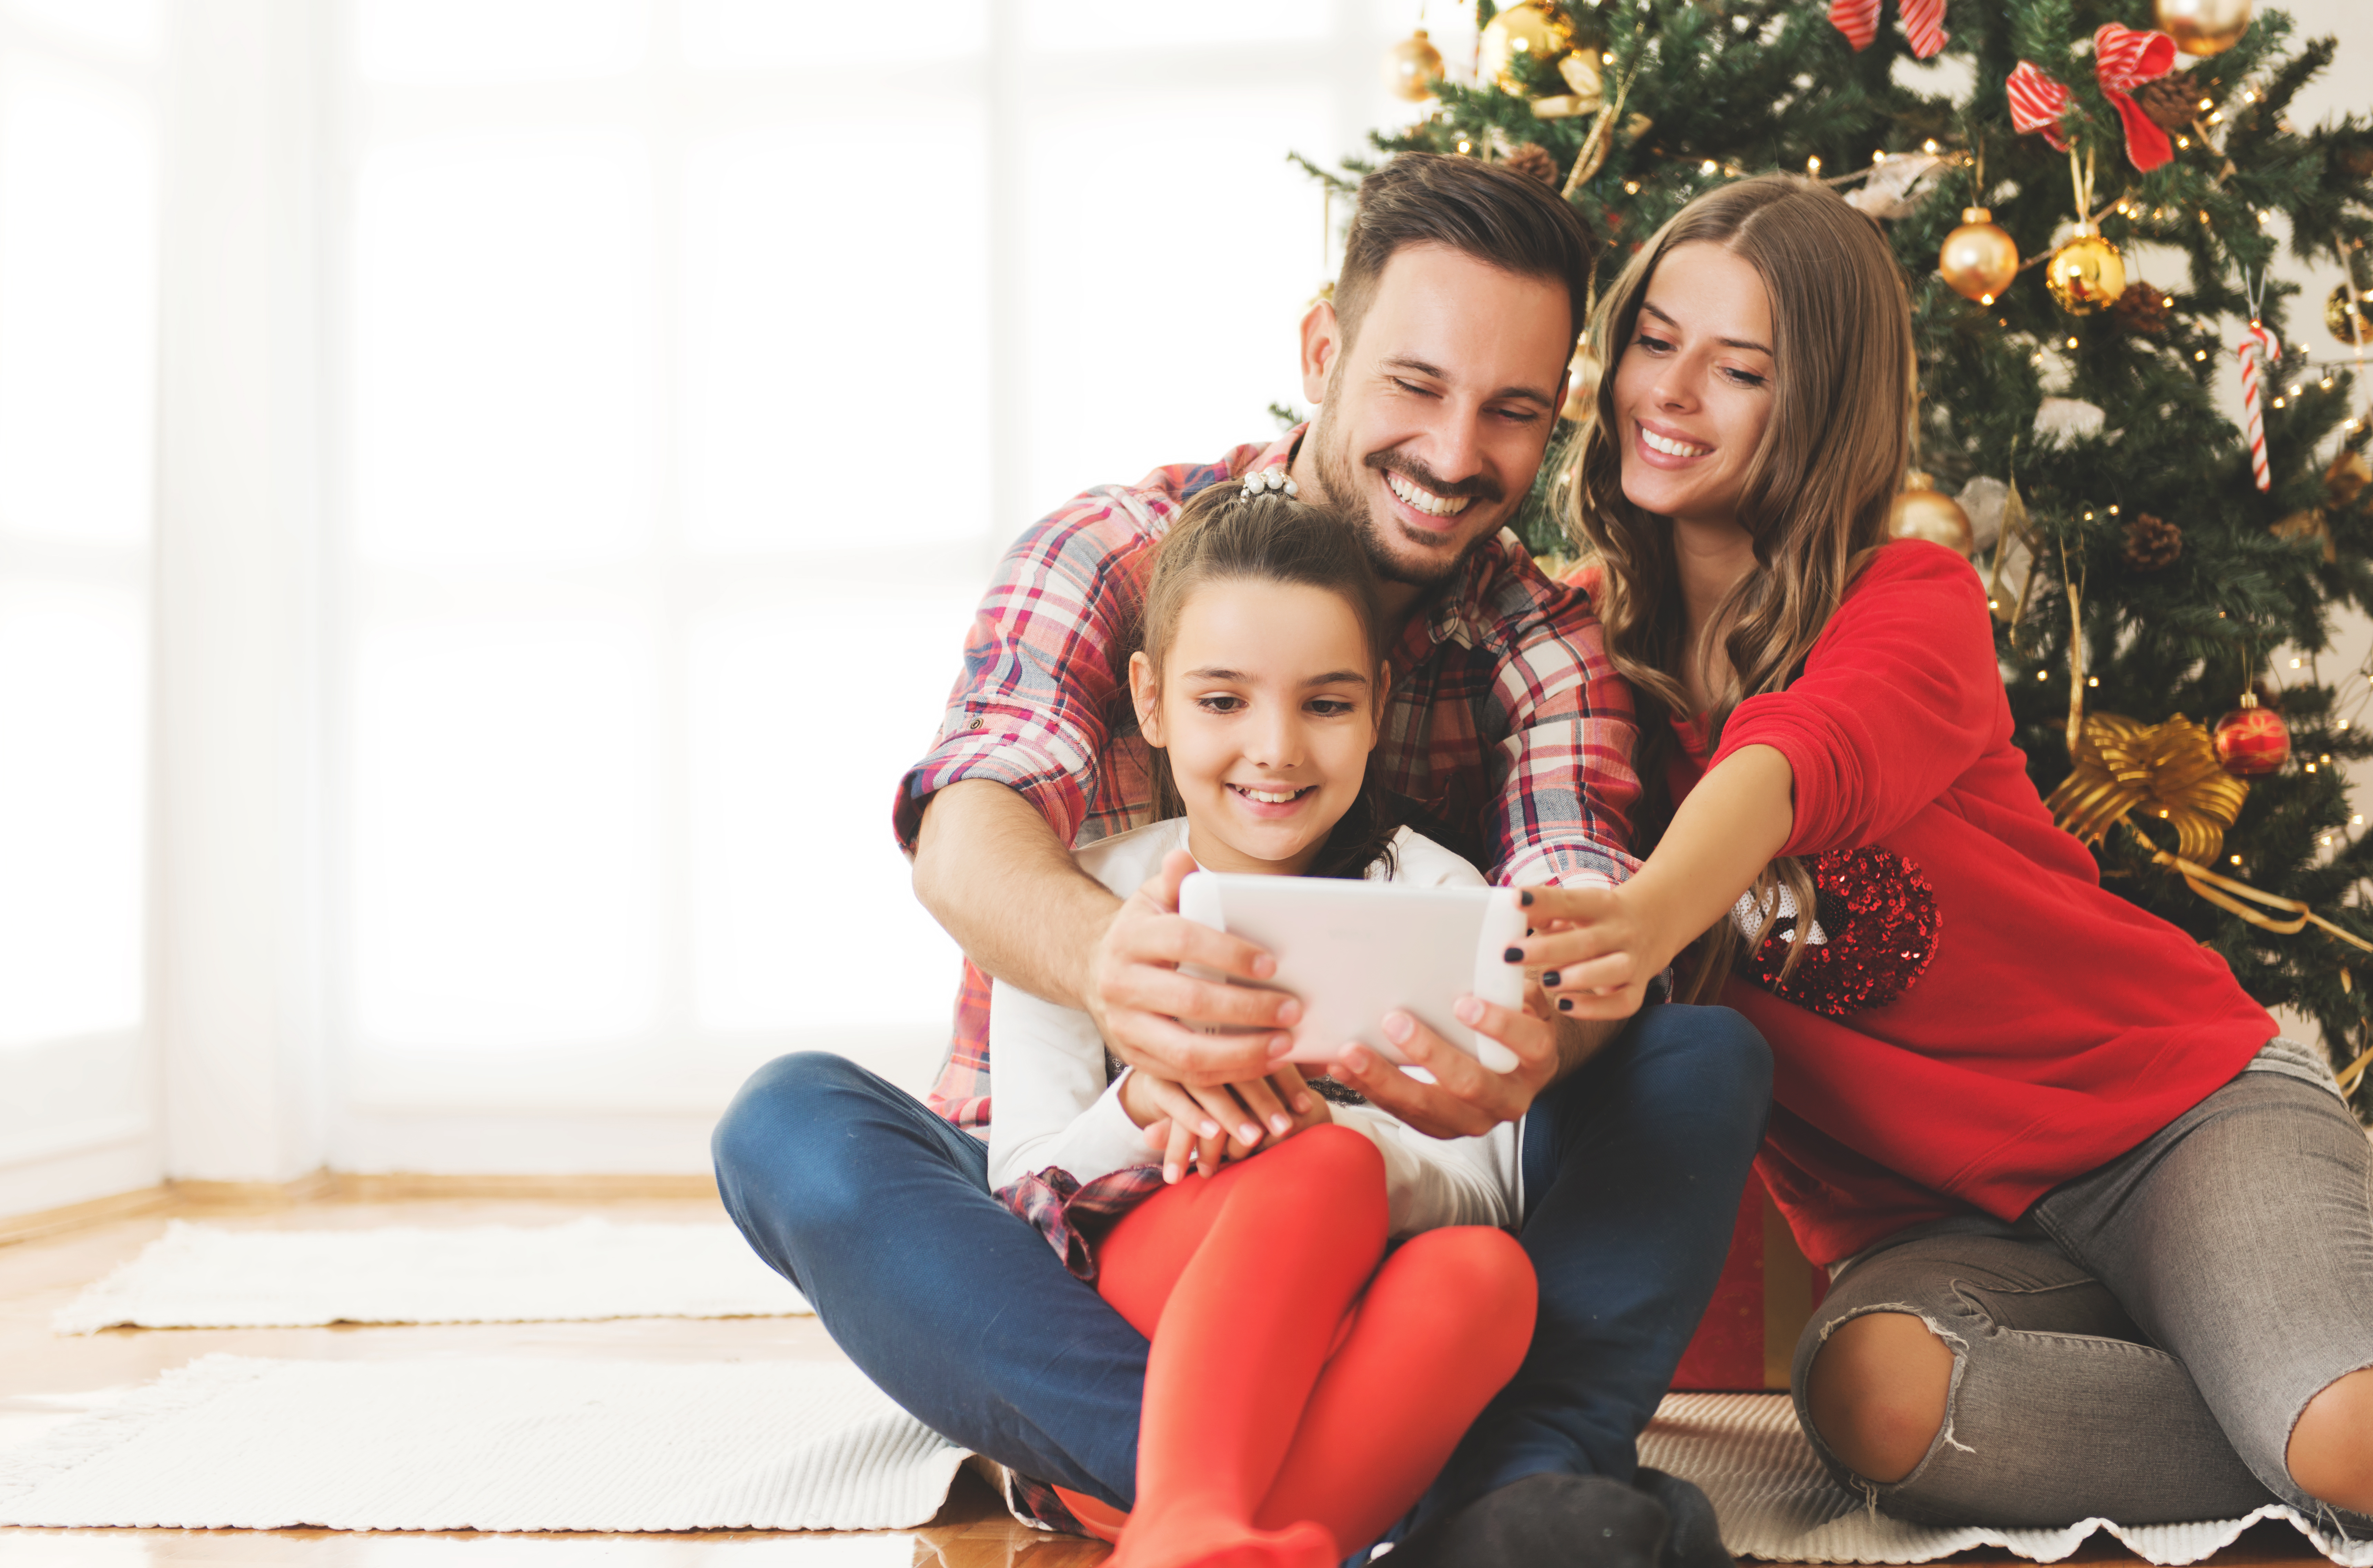 A family celebrating Christmas | Source: Shutterstock